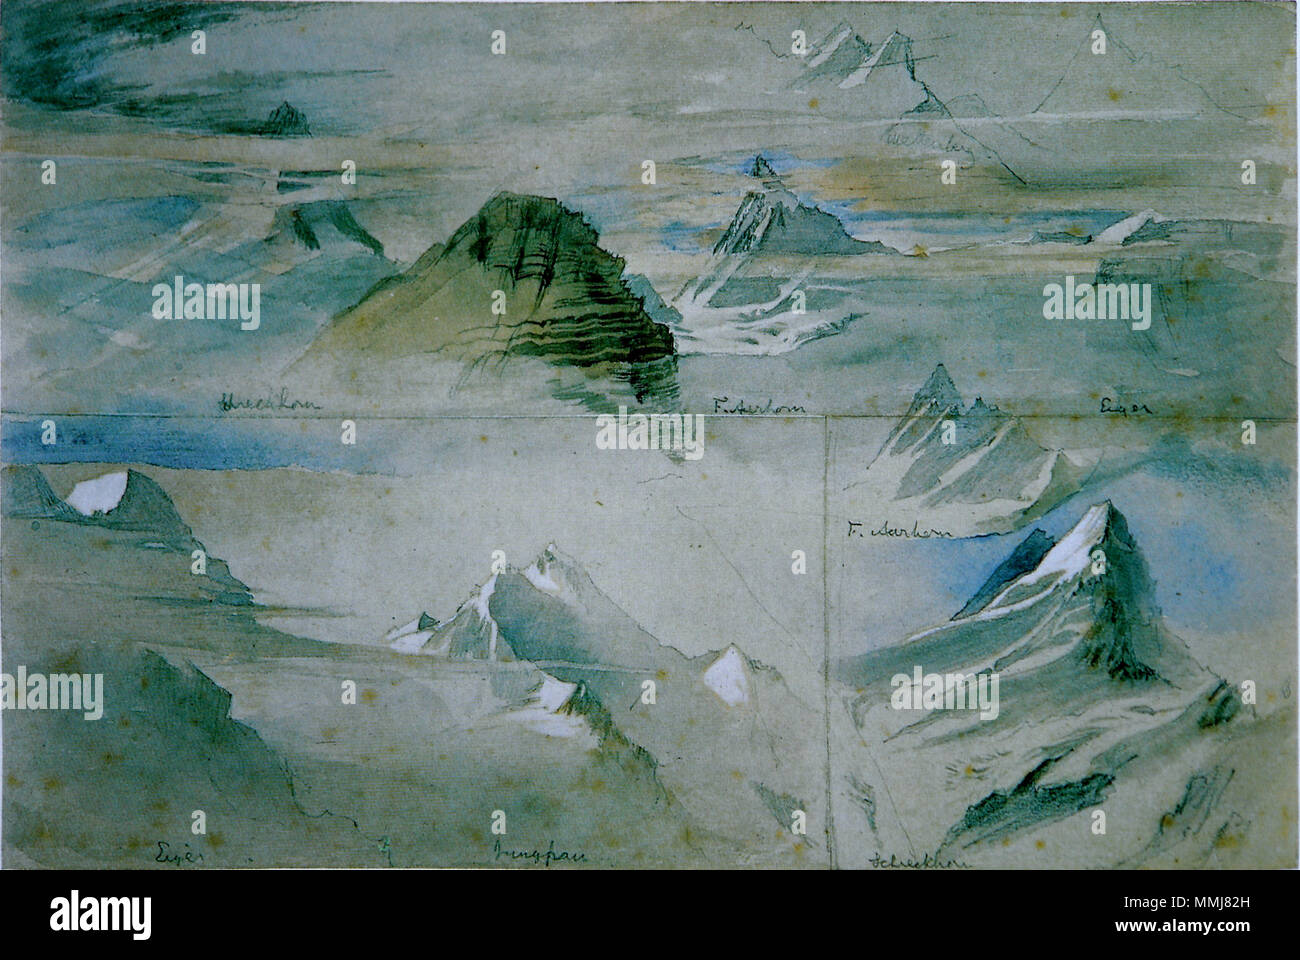 . Alpine Peaks. Pencil, watercolour and bodycolour on three joined sheets, 16.8 x 25.2 cm. Inscribed by Ruskin with names of peaks: Schreckhorn [twice], Finster, Aarhorn [twice], Mettenberg, Eiger [twice], Jungfrau.  . circa 1846.   John Ruskin  (1819–1900)       Alternative names Ruskin  Description British author, poet, artist and art critic  Date of birth/death 8 February 1819 20 January 1900  Location of birth/death London English: Brantwood, Lake District  Work location England, Venice, Switzerland, France  Authority control  : Q179126 VIAF:?73859585 ISNI:?0000 0001 2139 3446 ULAN:?500006 Stock Photo